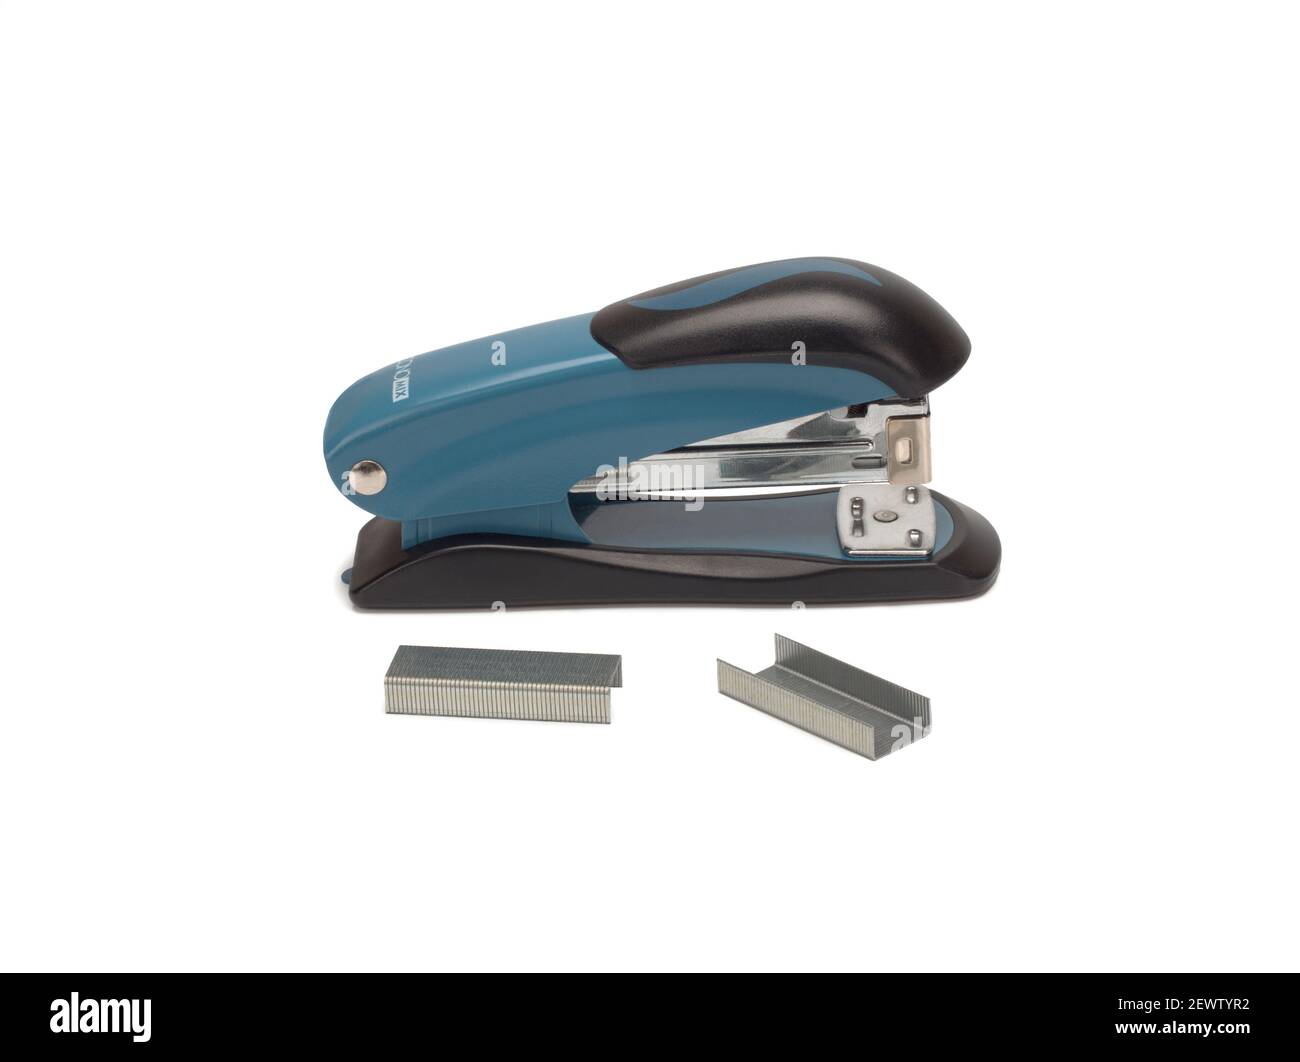 Top view of stapler and staples isolate on white background. Stock Photo